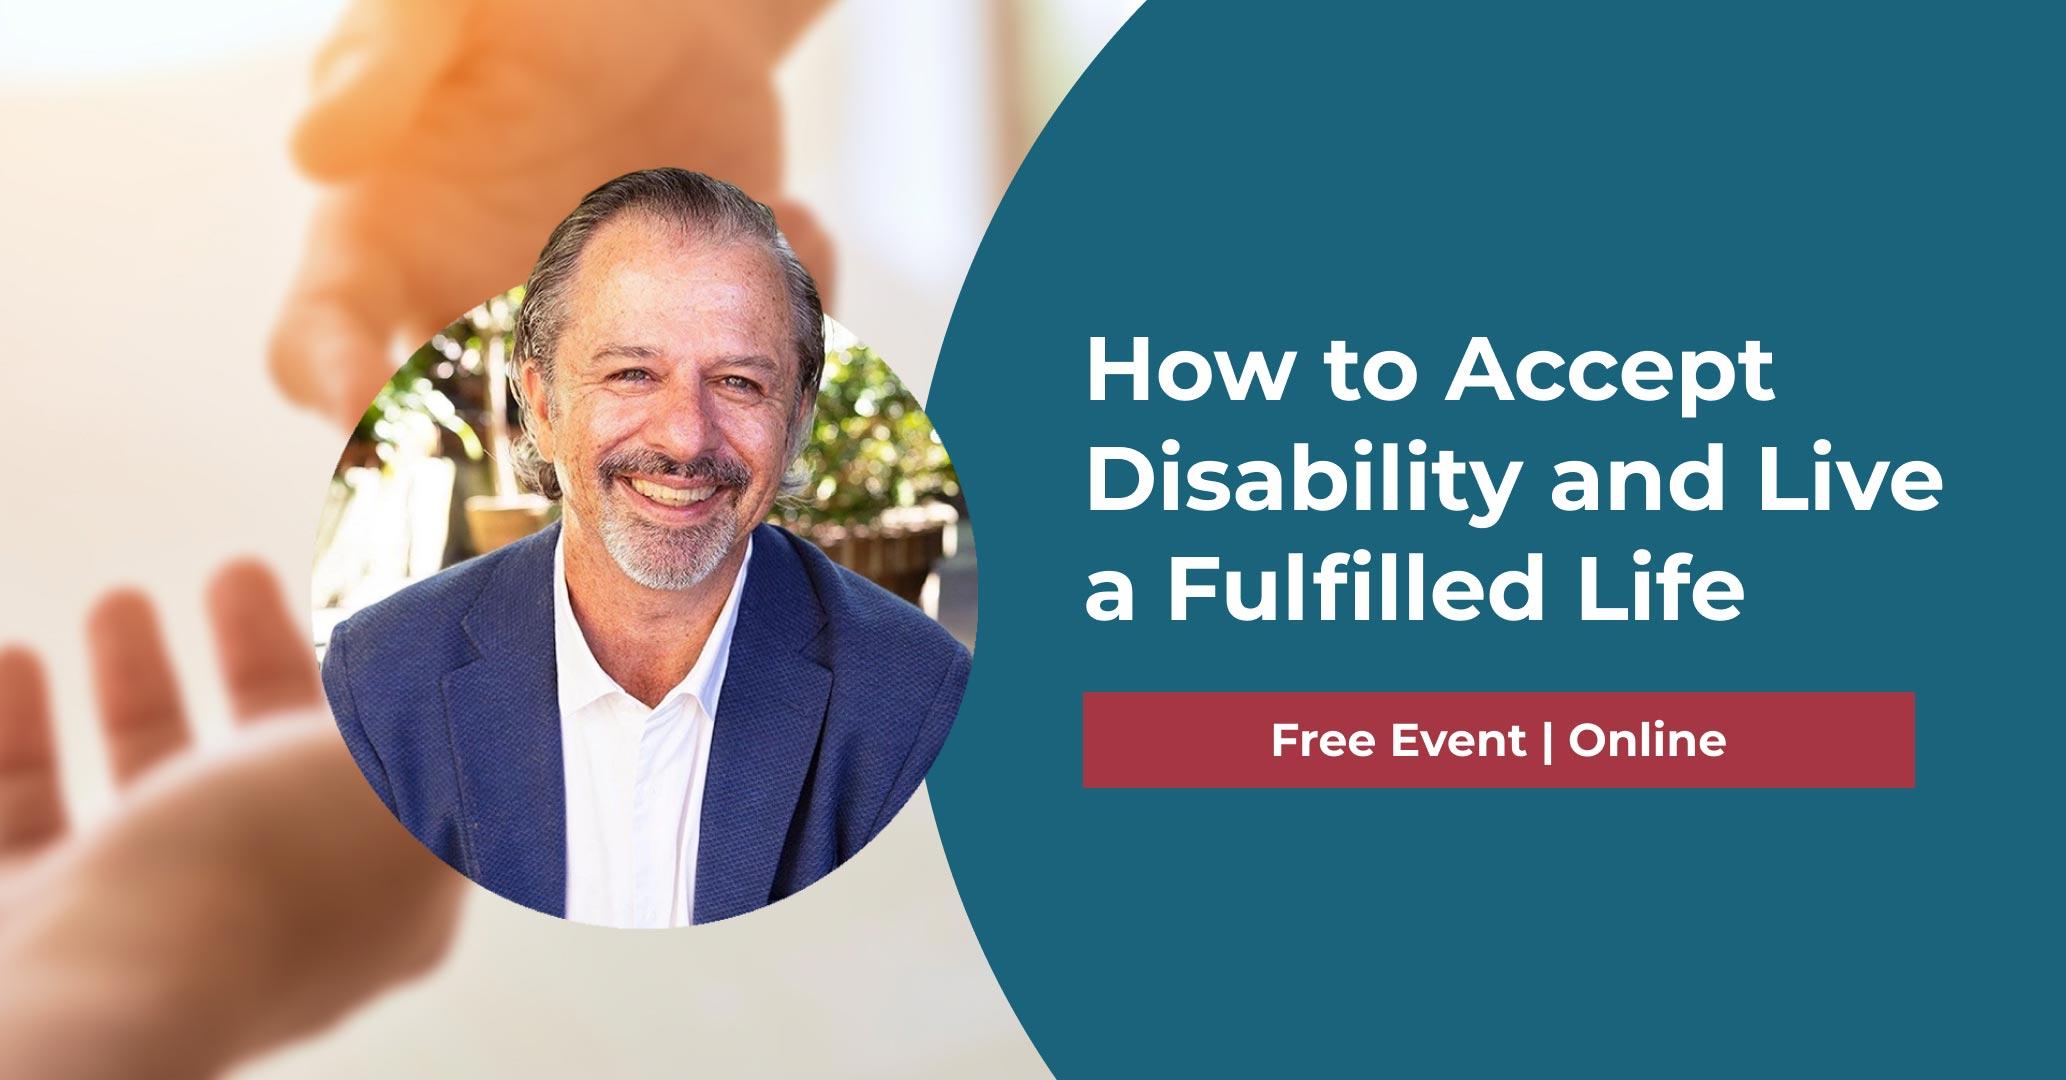 How to Accept Disability and Live a Fulfilled Life